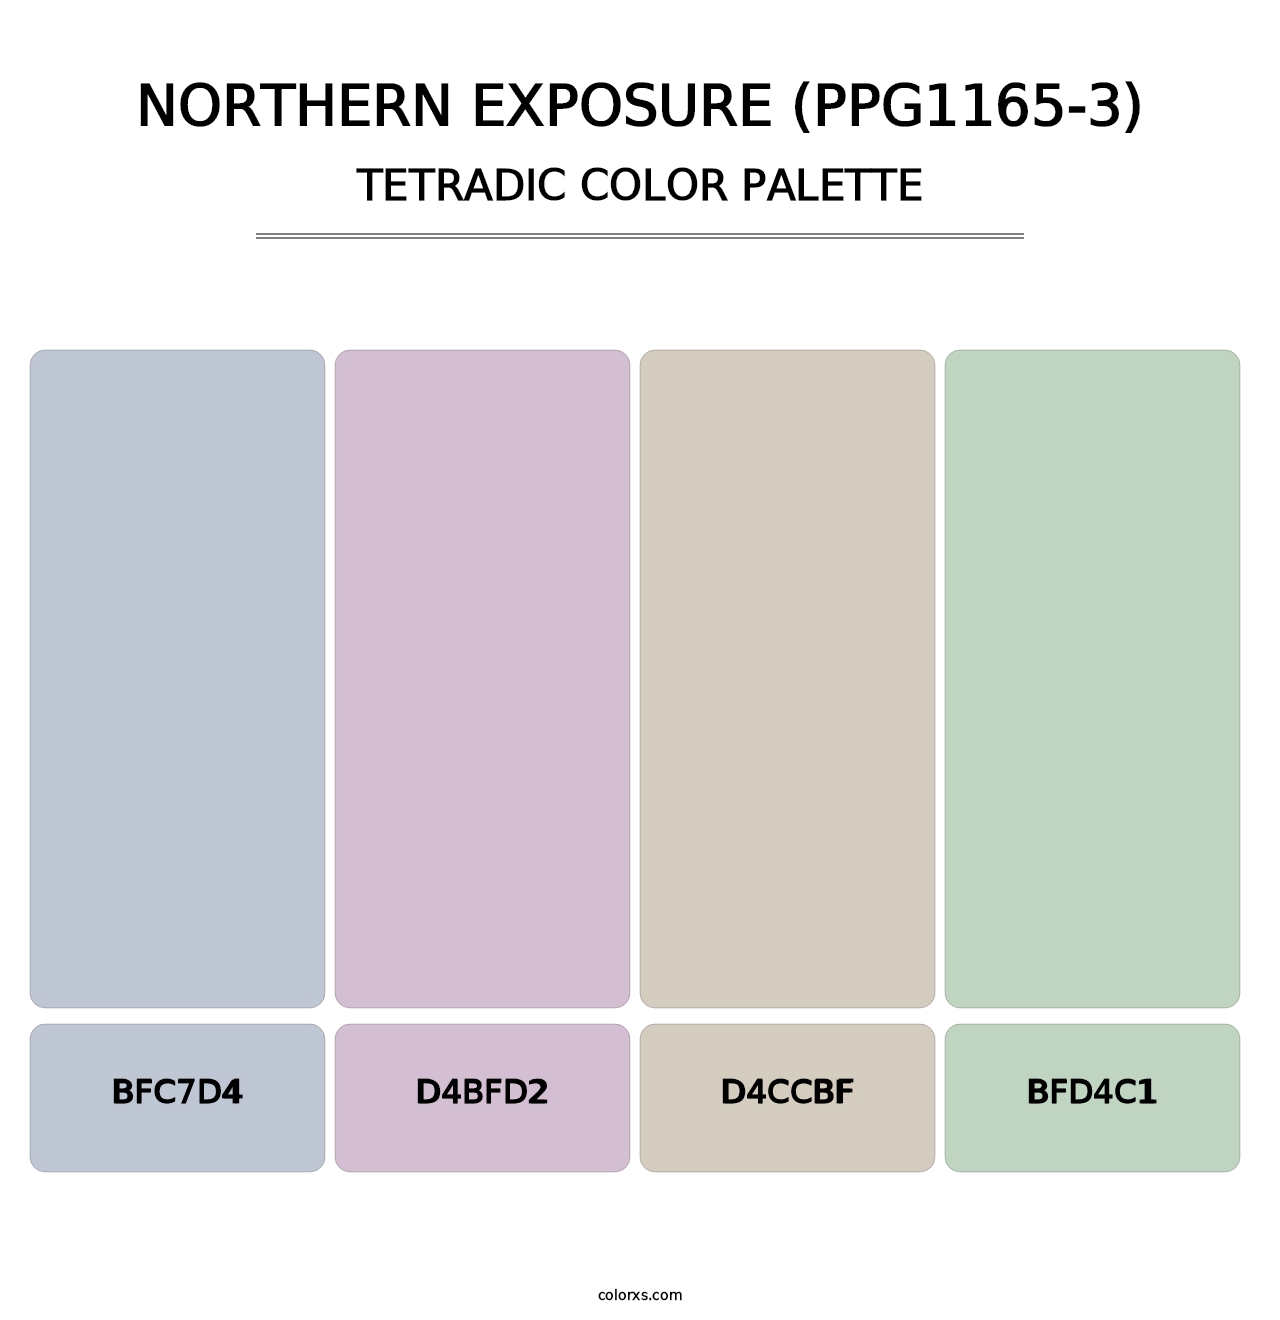 Northern Exposure (PPG1165-3) - Tetradic Color Palette